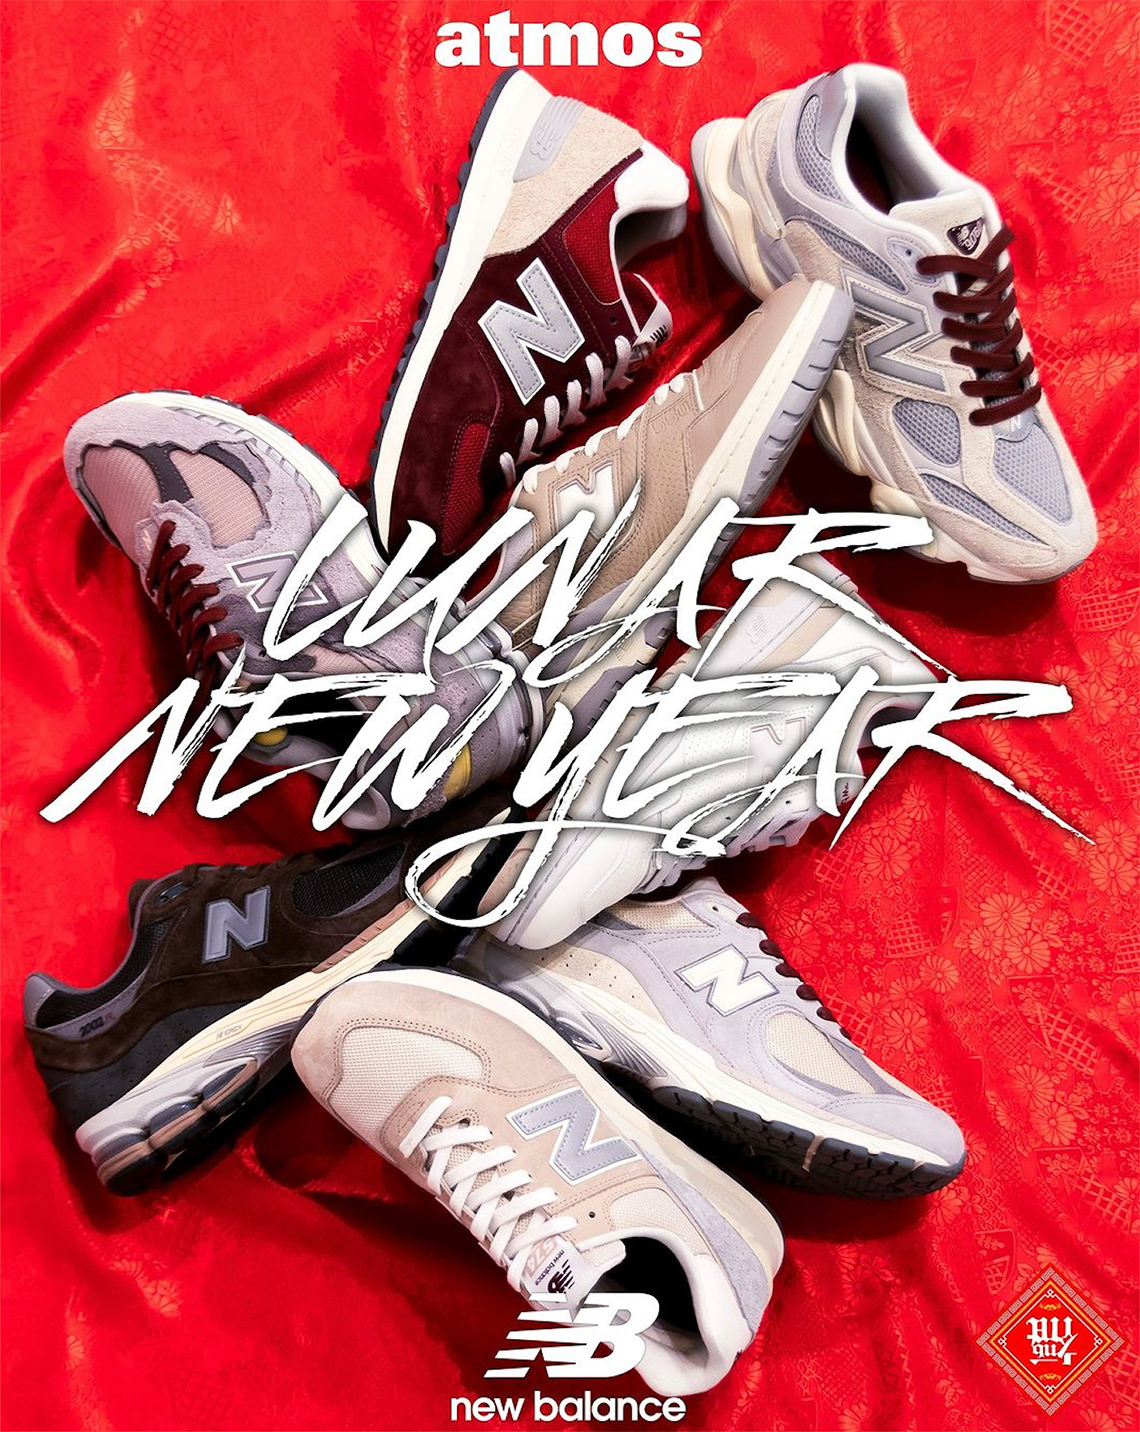 New Balance Lunar New Year 2023 Collection 1